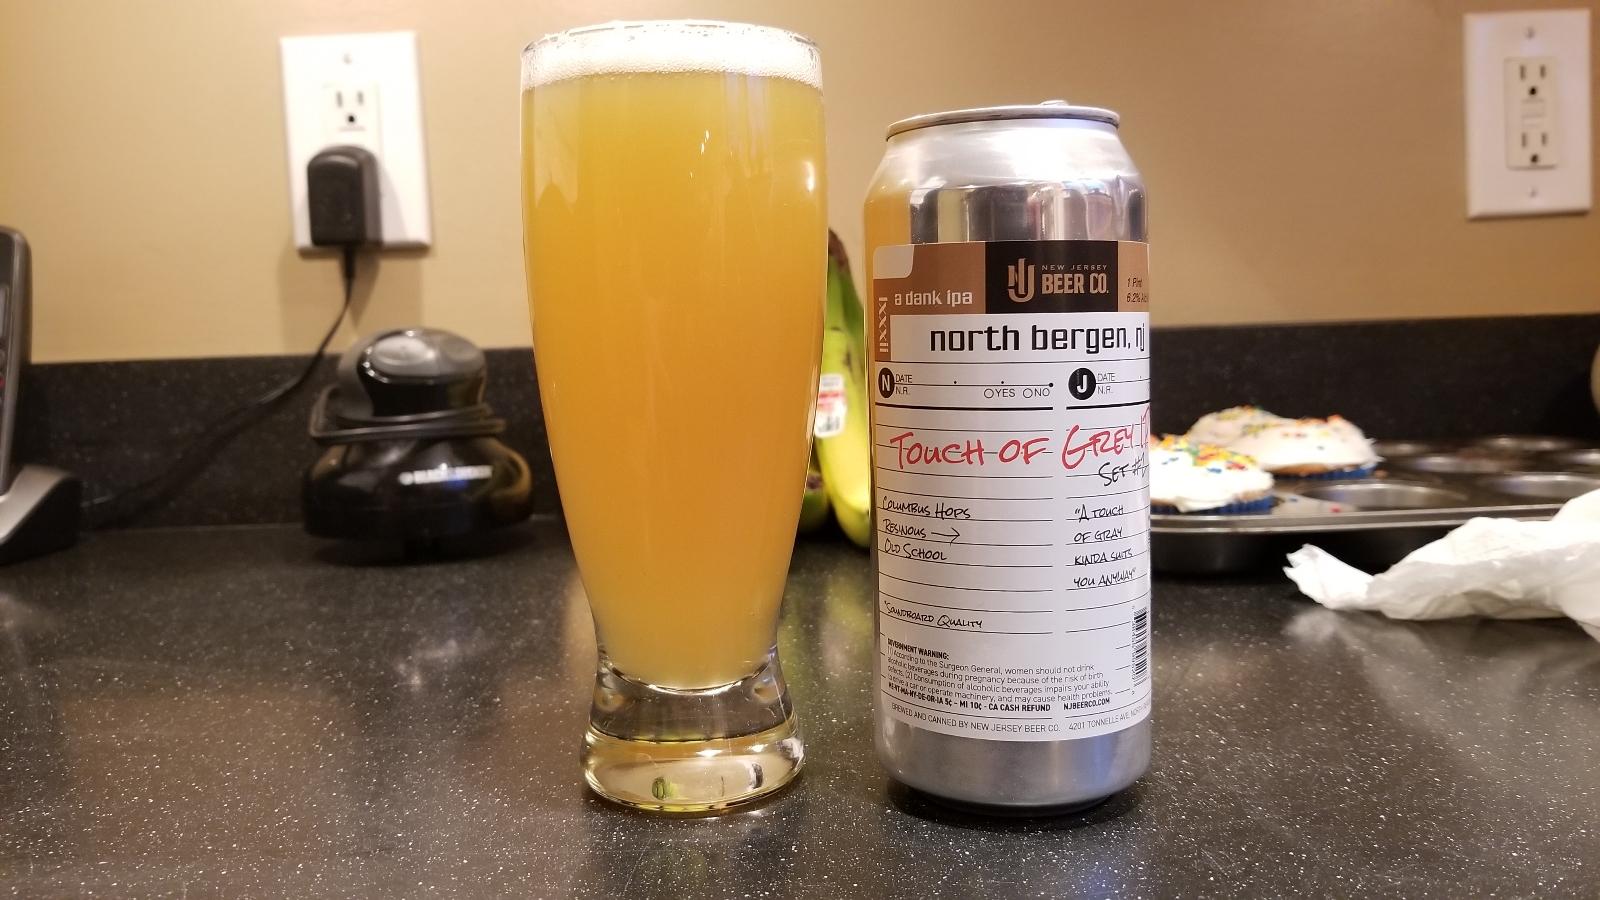 Touch Of Grey IPA - Set #2